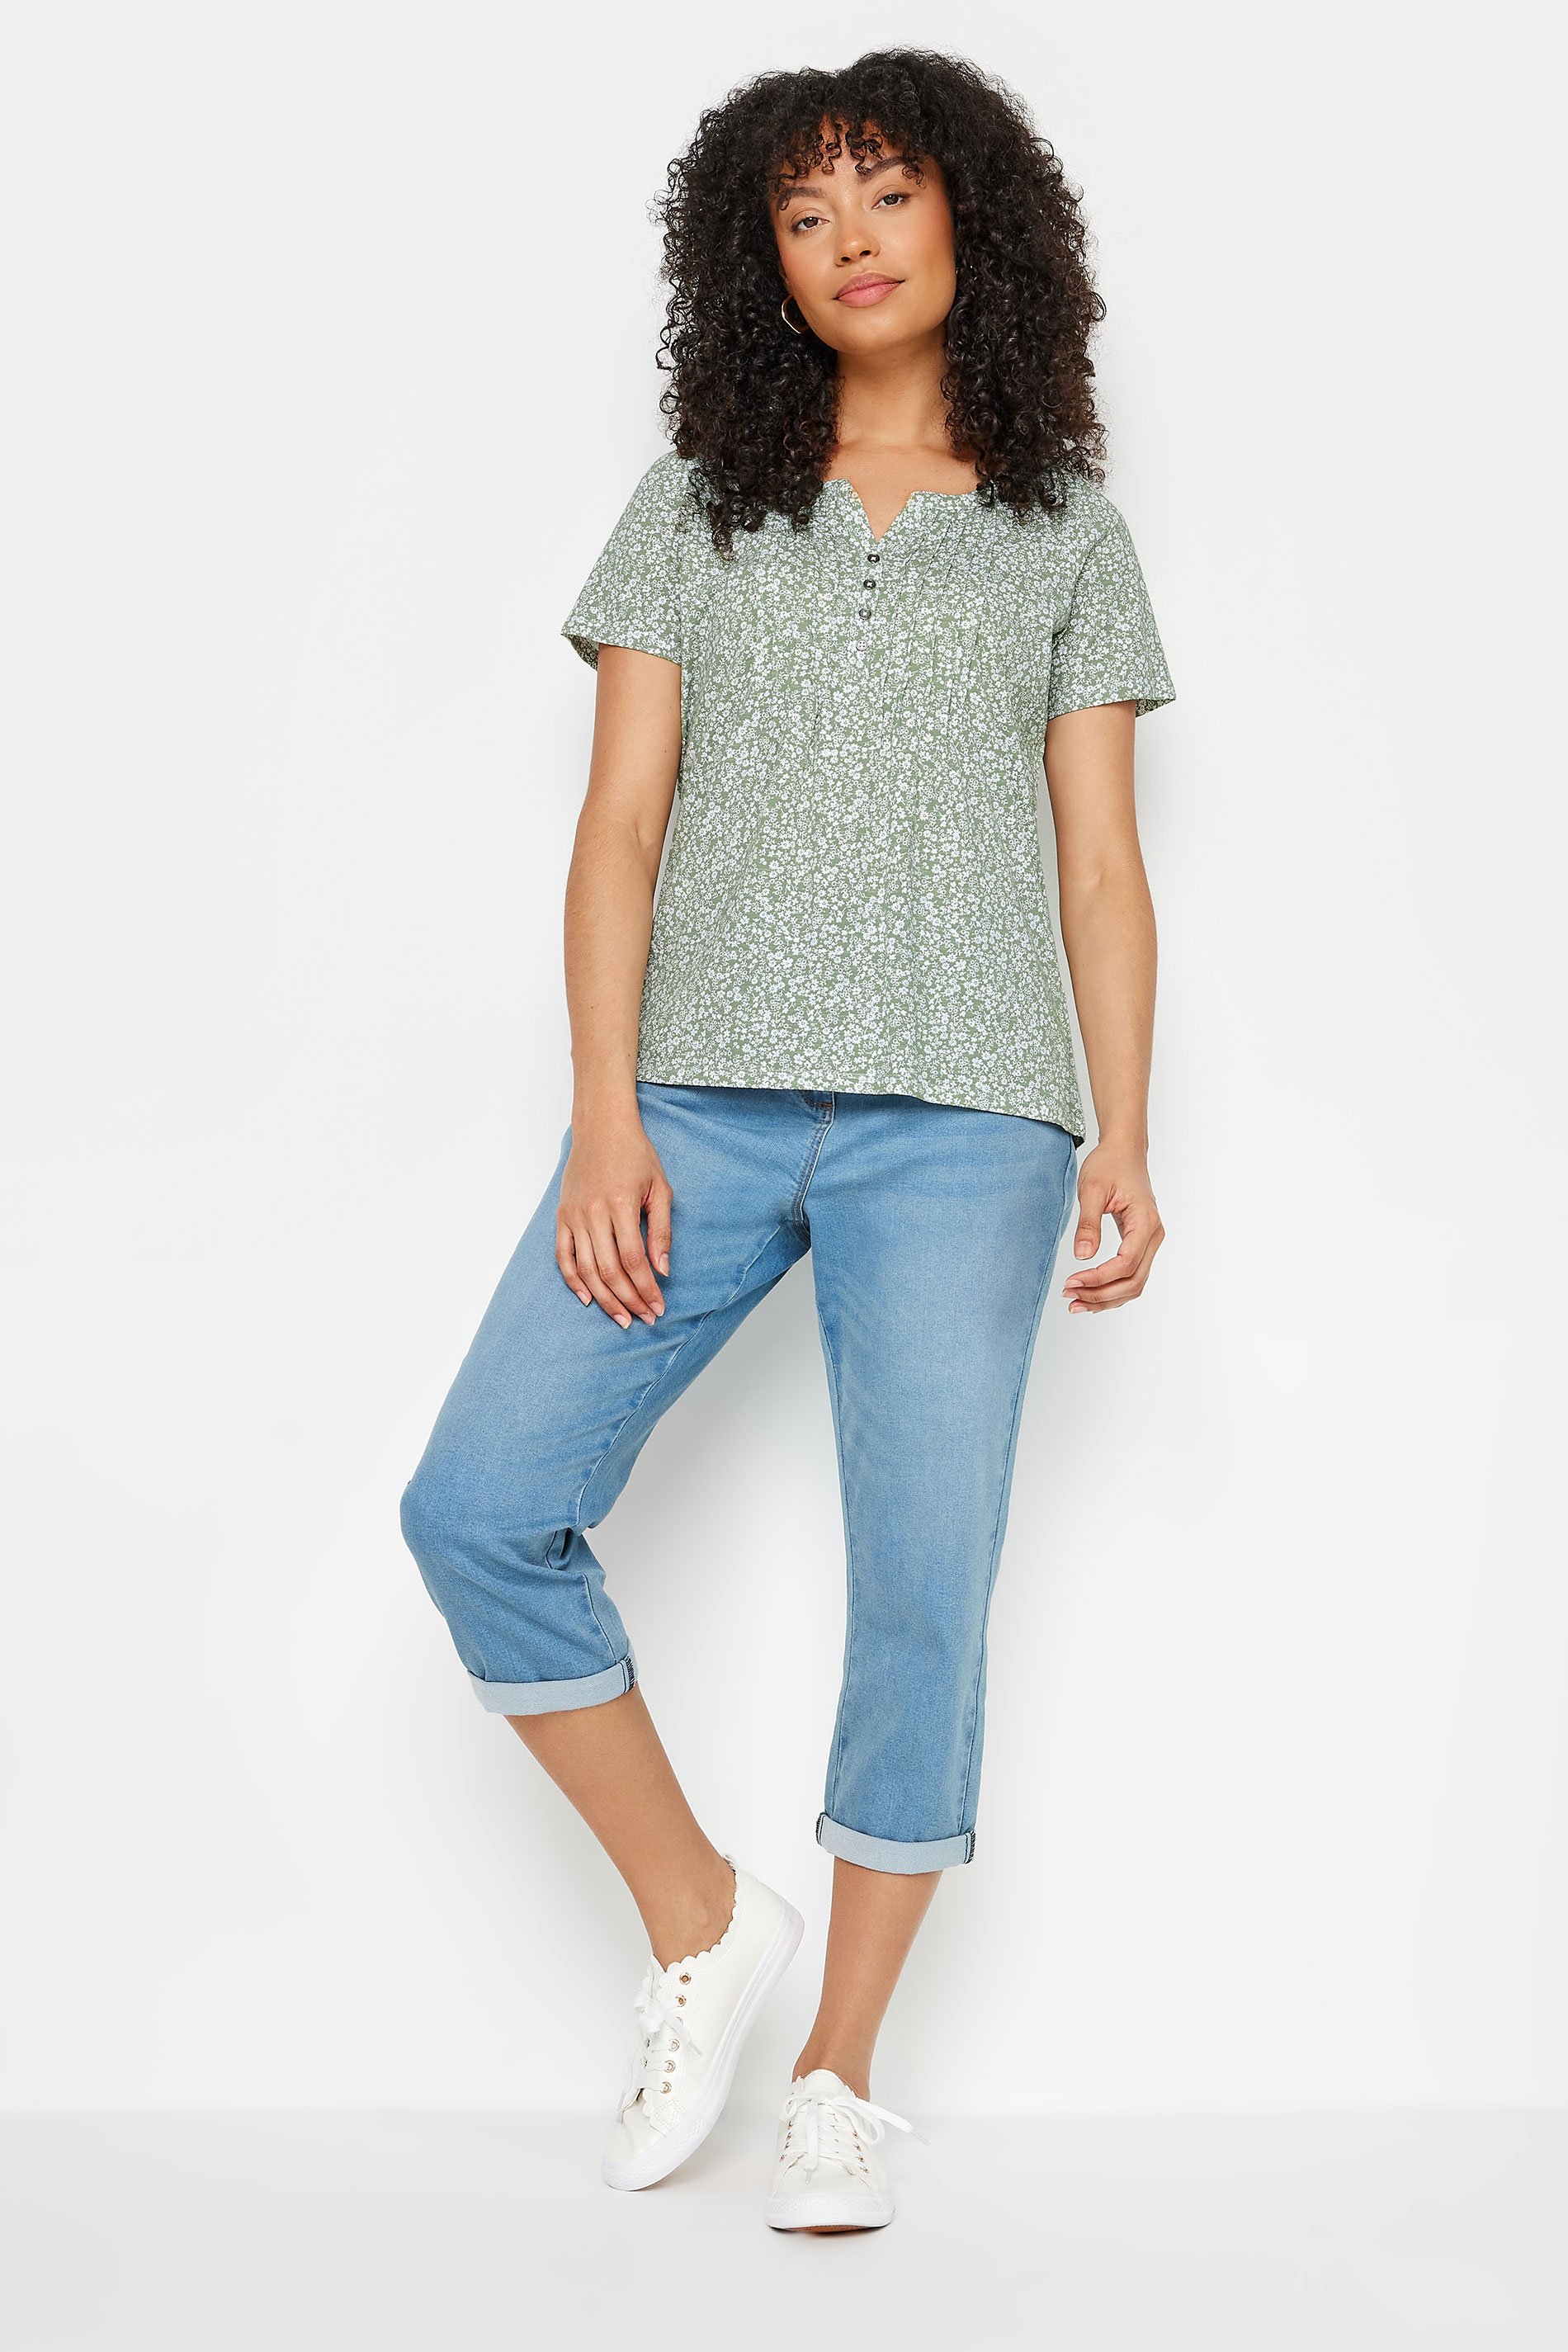 M&Co Green Floral Print Cotton Short Sleeve Henley Top | M&Co 2